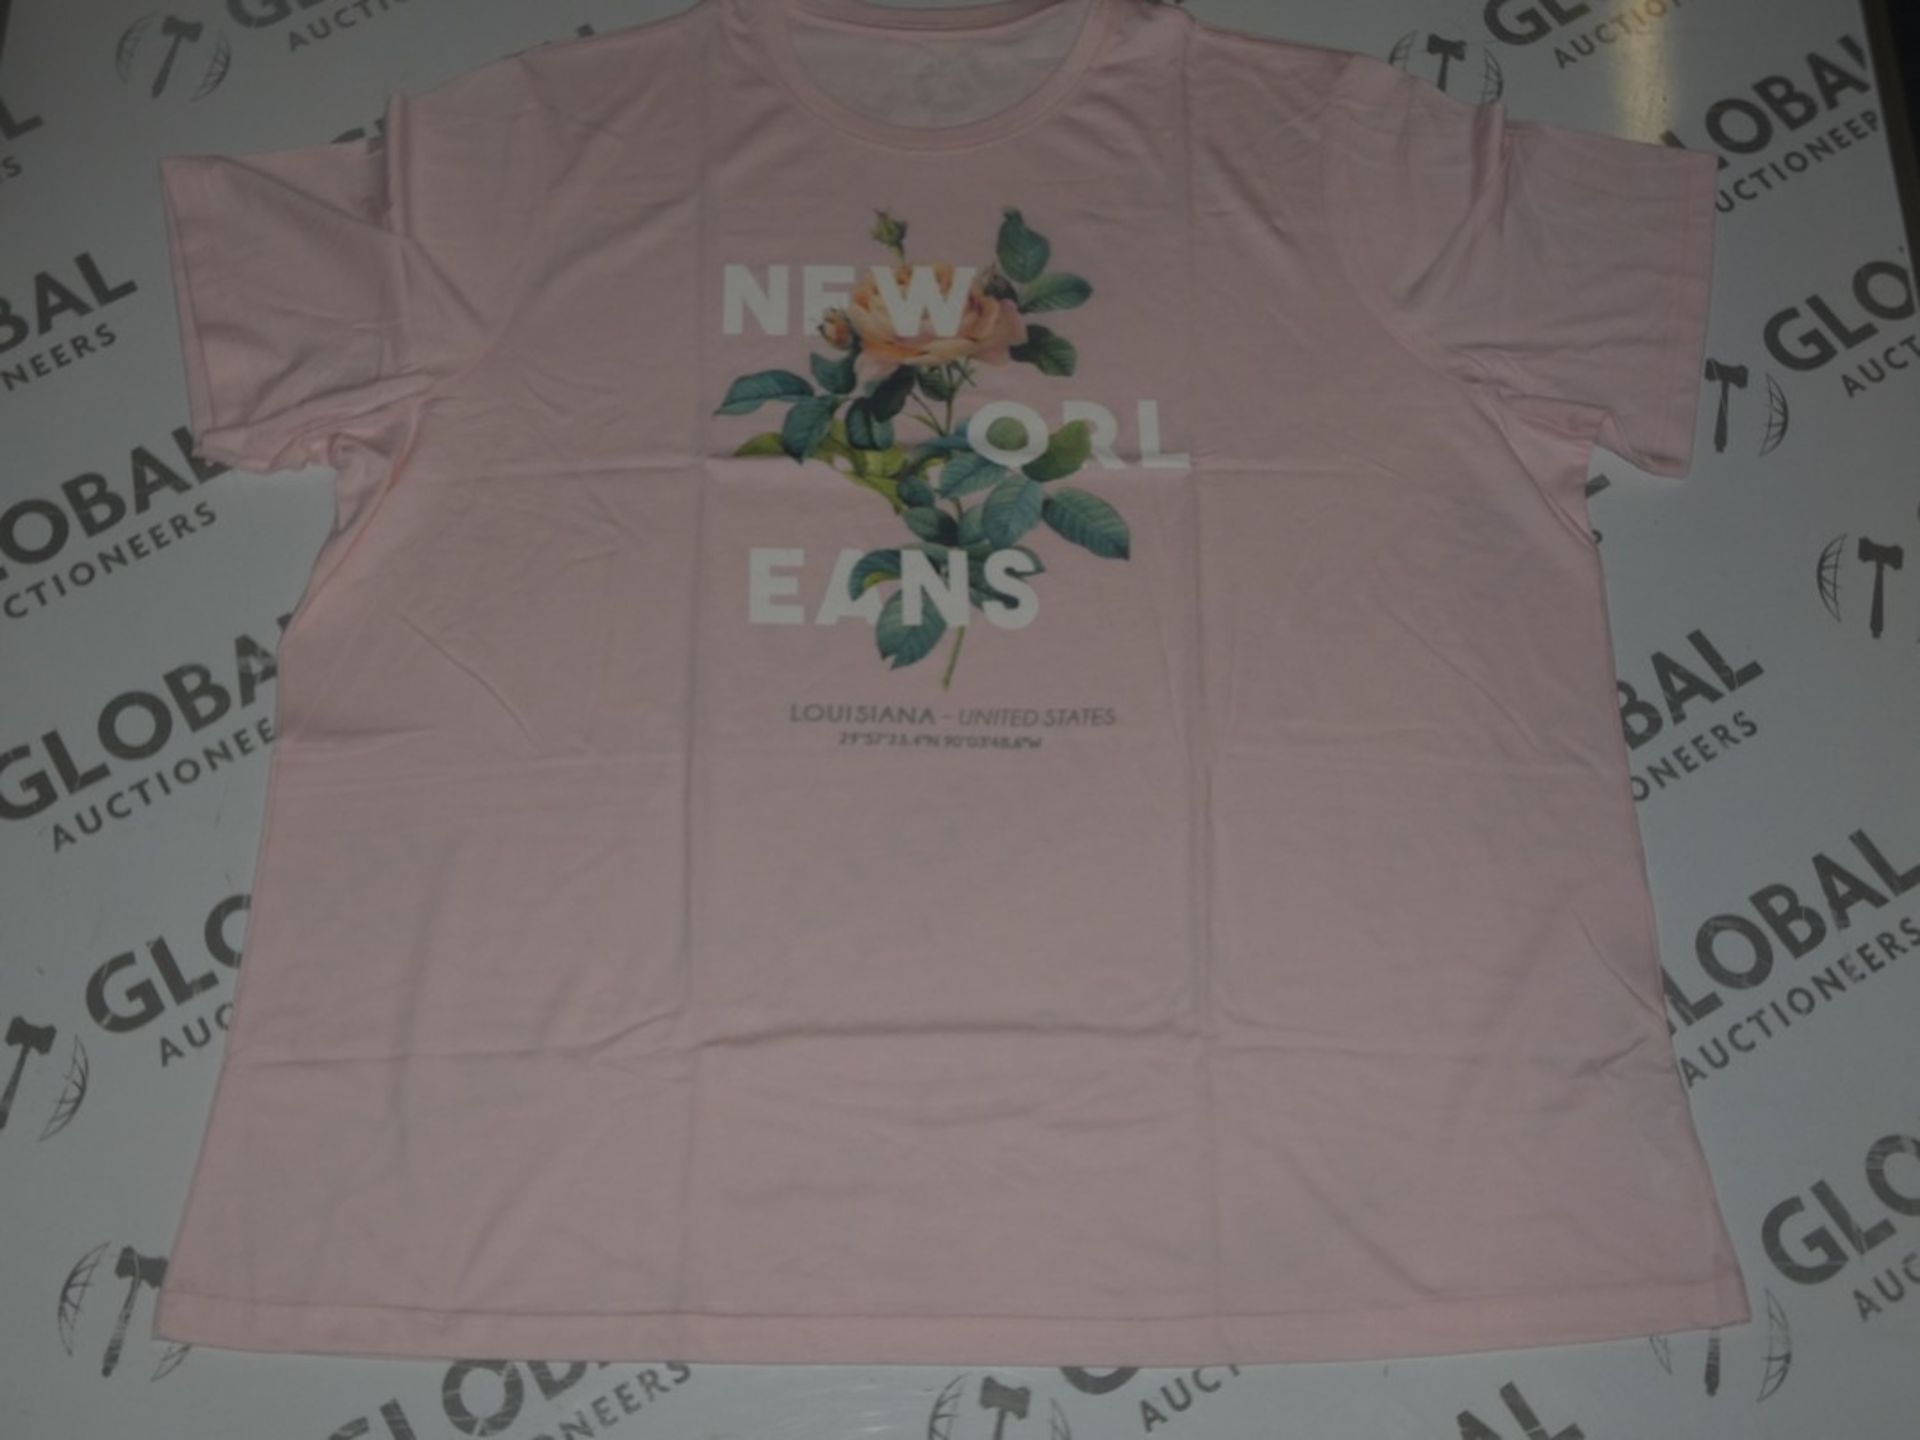 Lot to Contain 7 Brand New Jackamo New Orleans, Louisiana United States Pink Designer T-Shirts